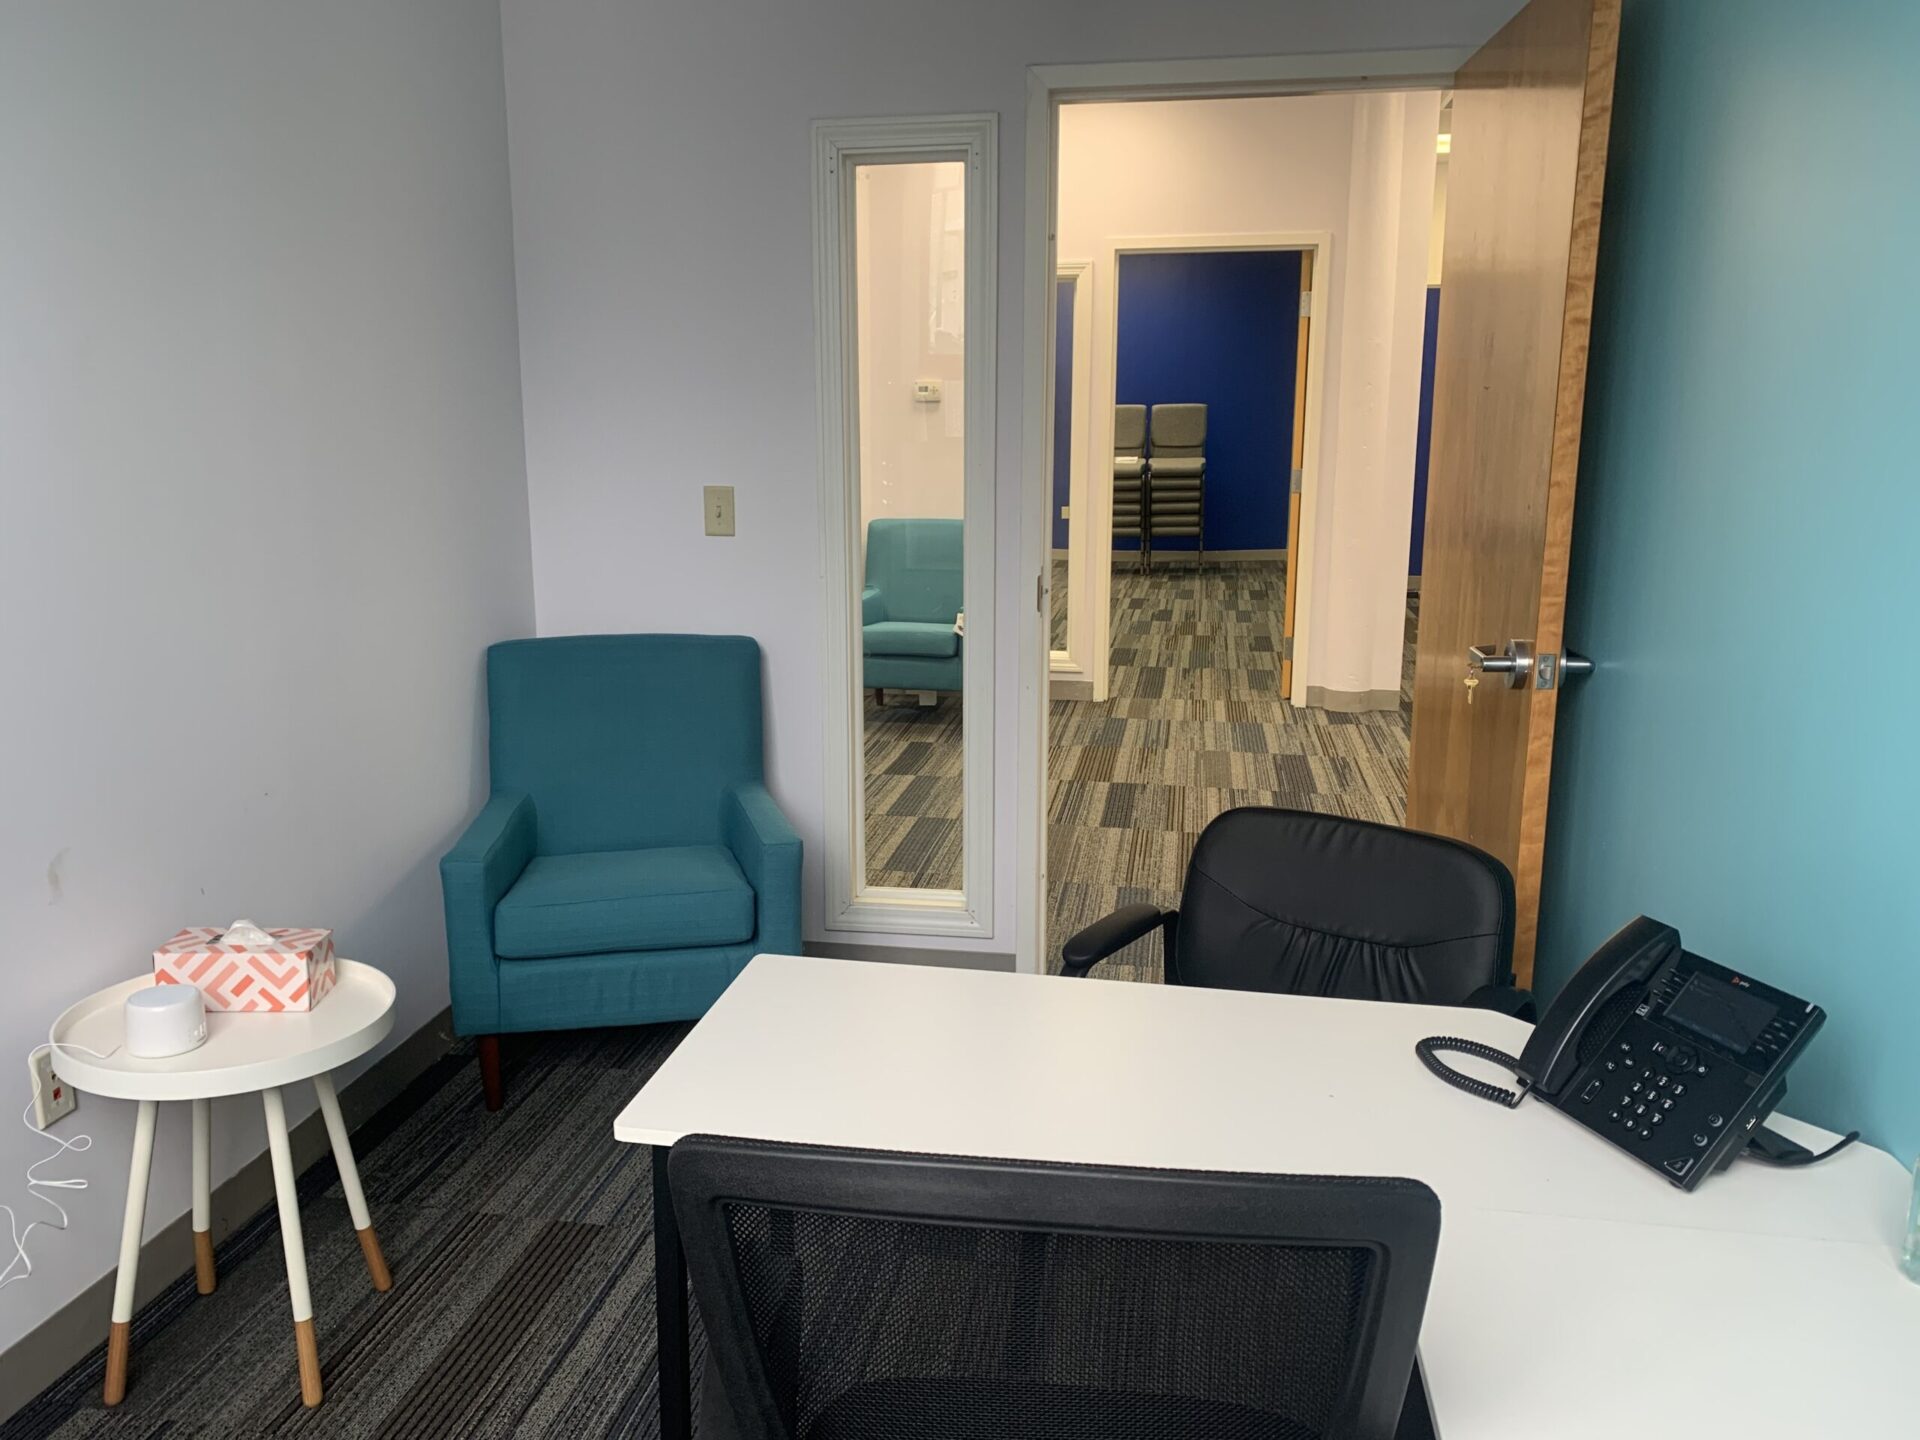 Eleanor Health one-on-one counseling meeting area